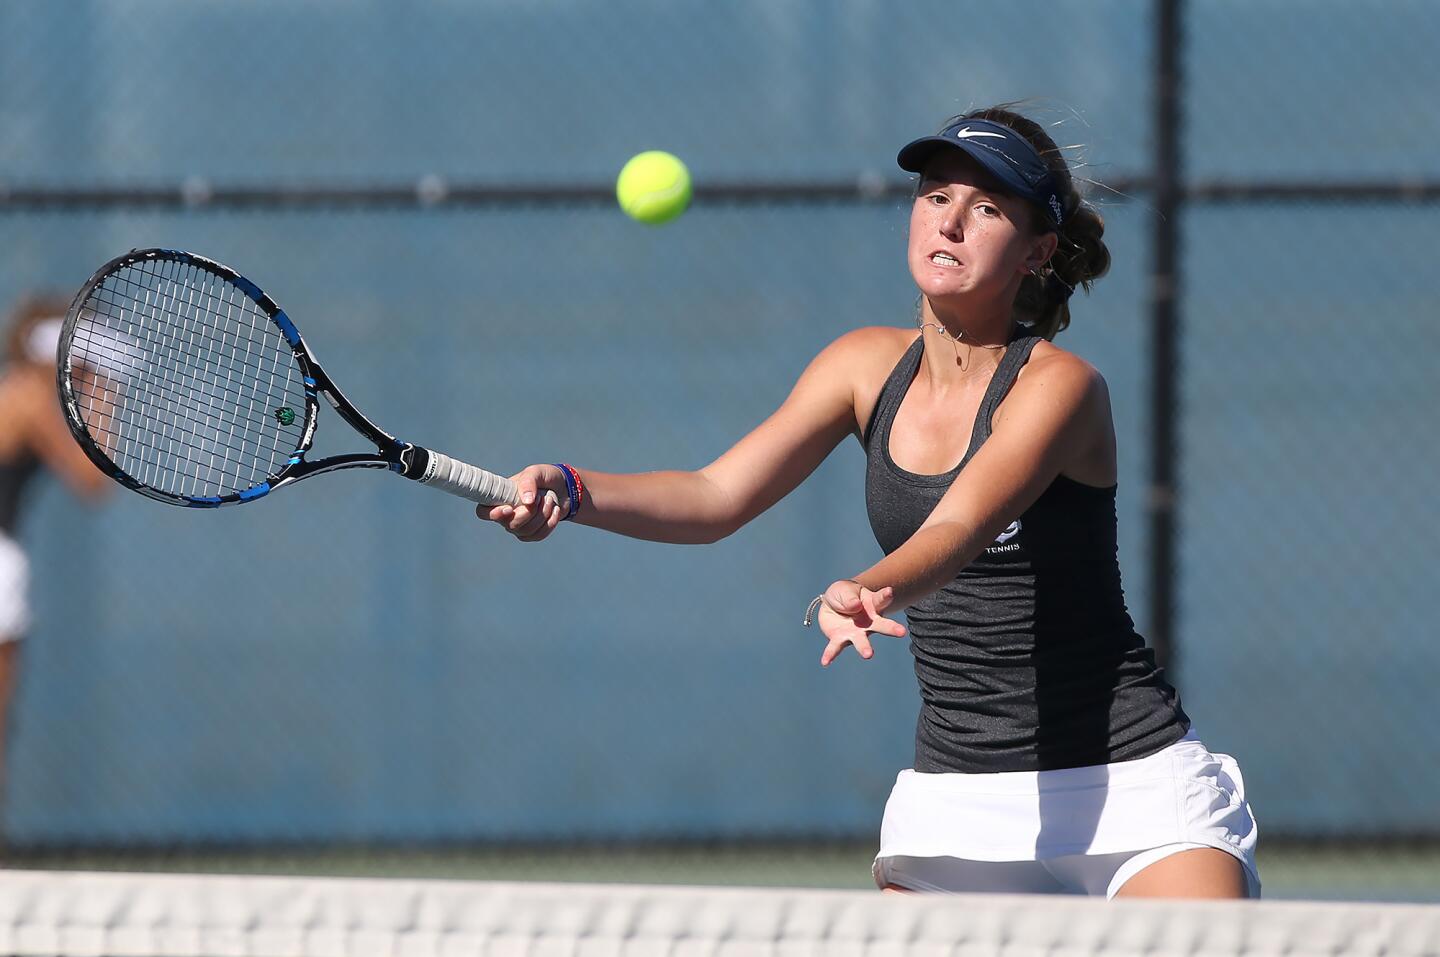 Newport Harbor High's Riley DeCinces steps into a winning volley as she plays in doubles match with partner Sterling Solomon in girlsâ€™ non-league tennis match against Troy on Wednesday.